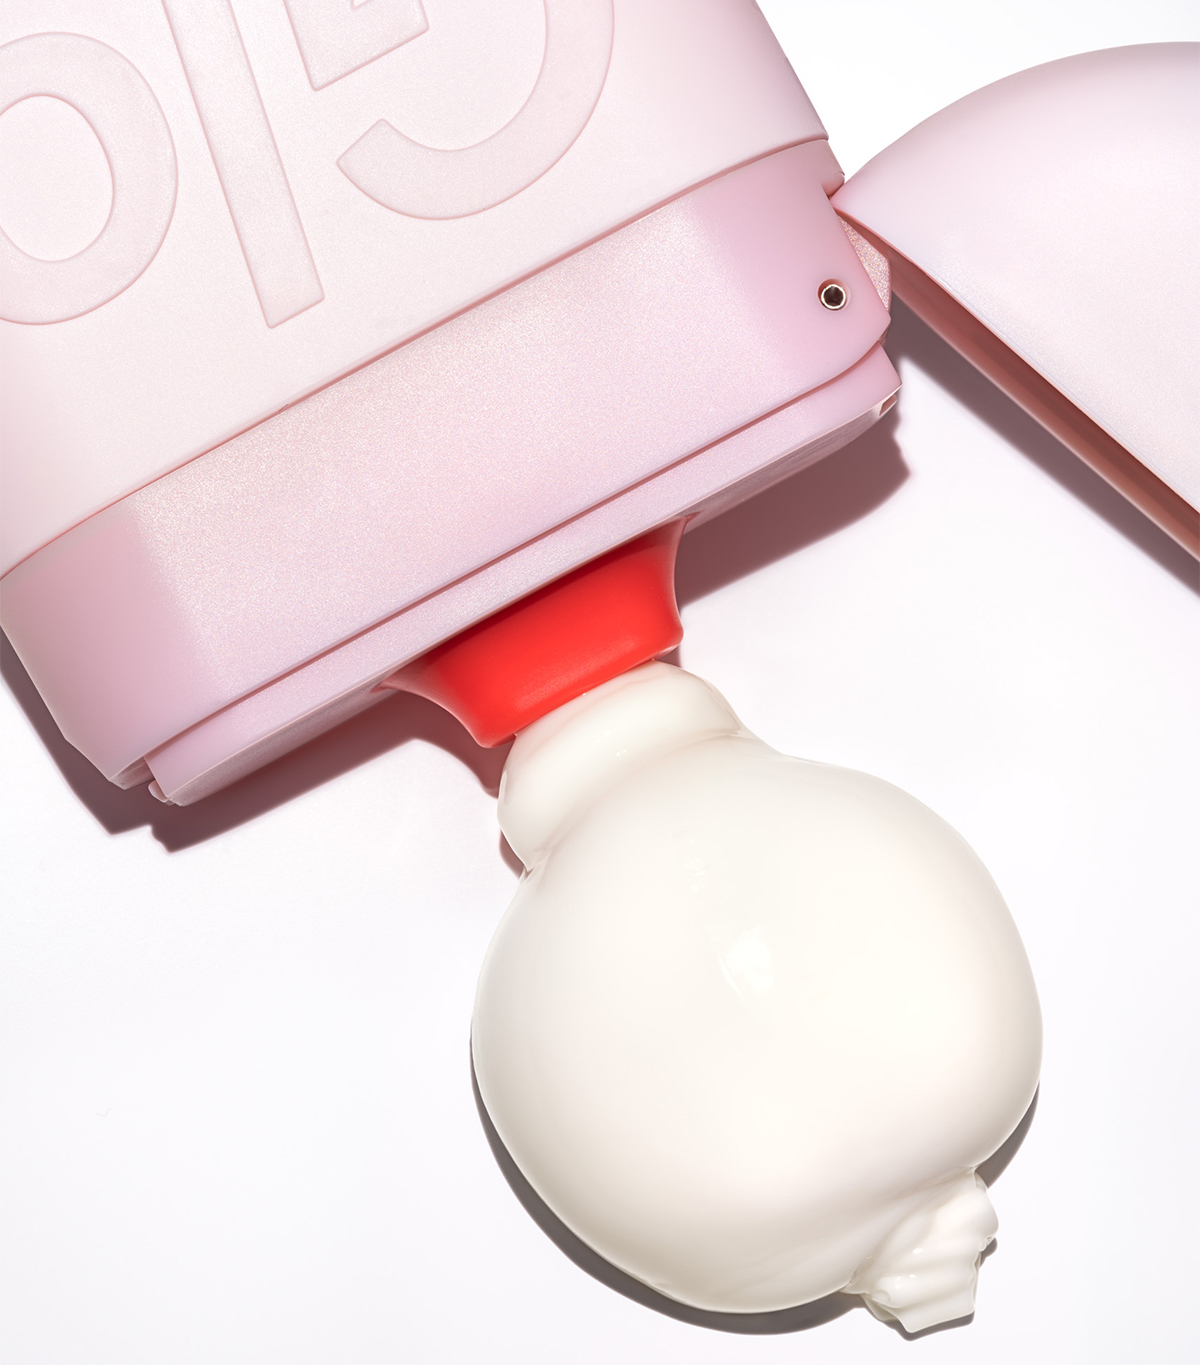 Glossier Spent Two Years Creating the Perfect Hand Cream—and It’s Finally Here